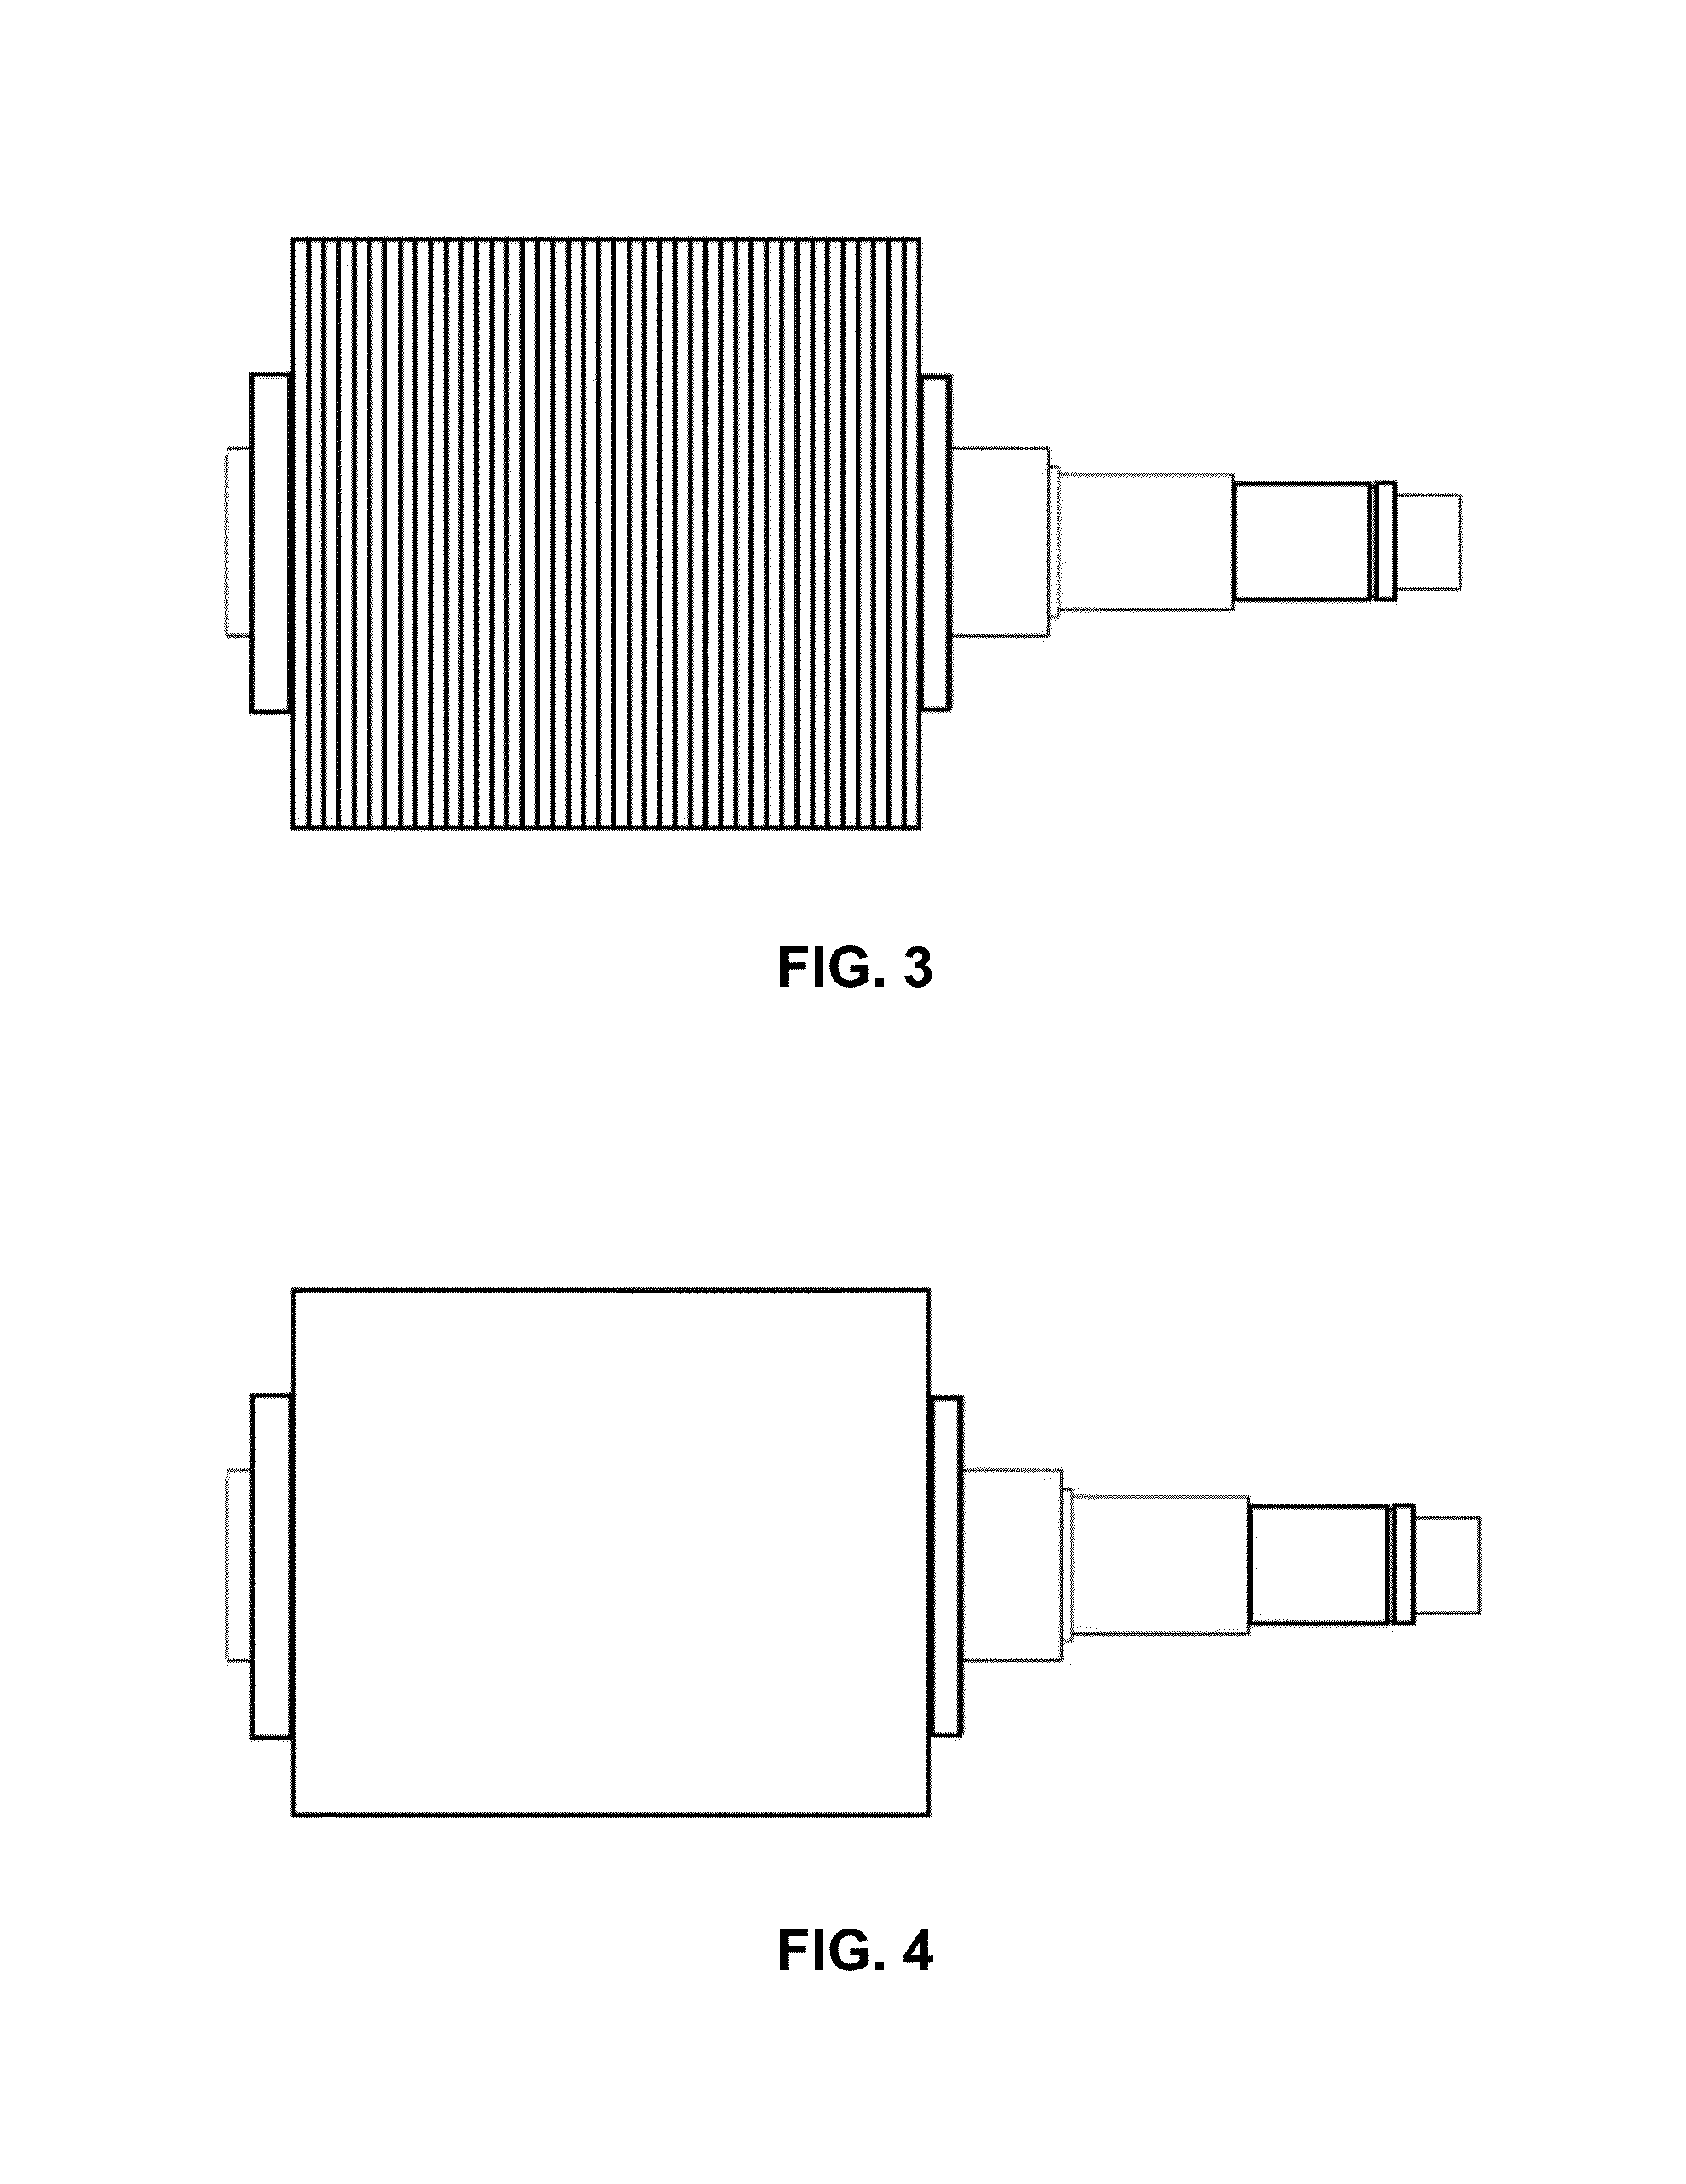 Methods of manufacturing a modular pulling roll